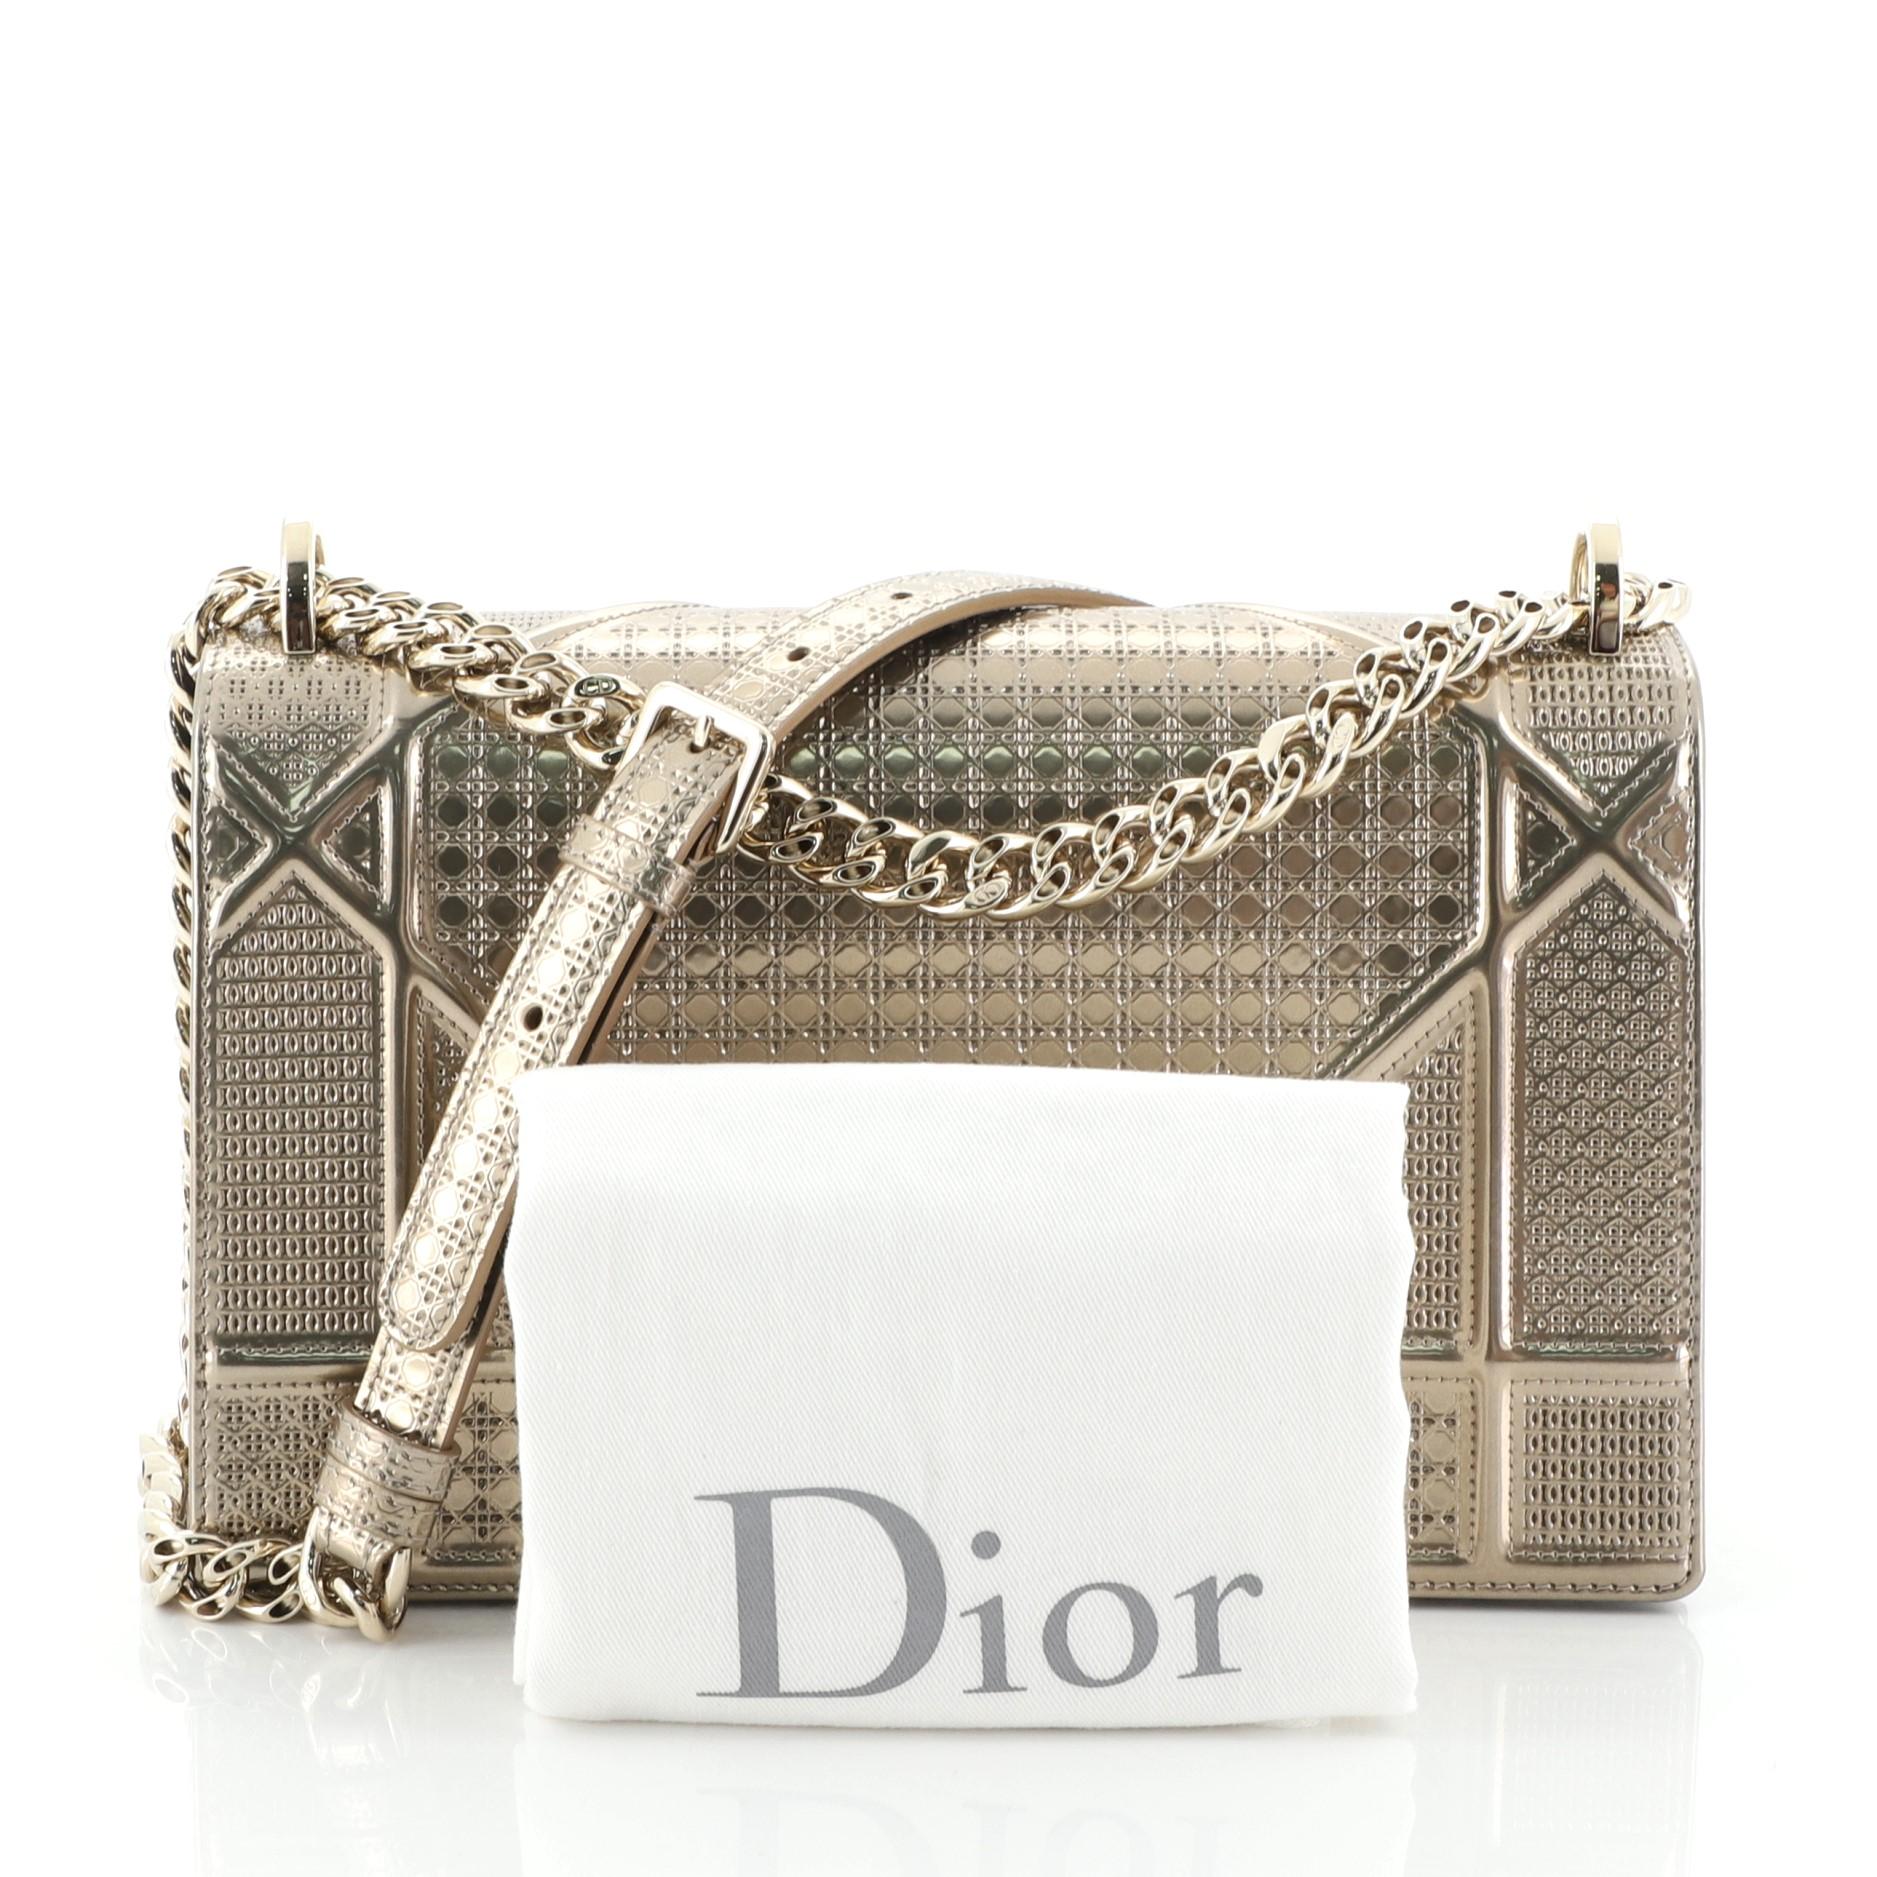 This Christian Dior Diorama Flap Bag Cannage Embossed Calfskin Medium, crafted in gold cannage embossed calfskin, features a graphic-style cannage quilt design, chain strap with leather pad, and gold-tone hardware. Its crest-shaped clasp closure